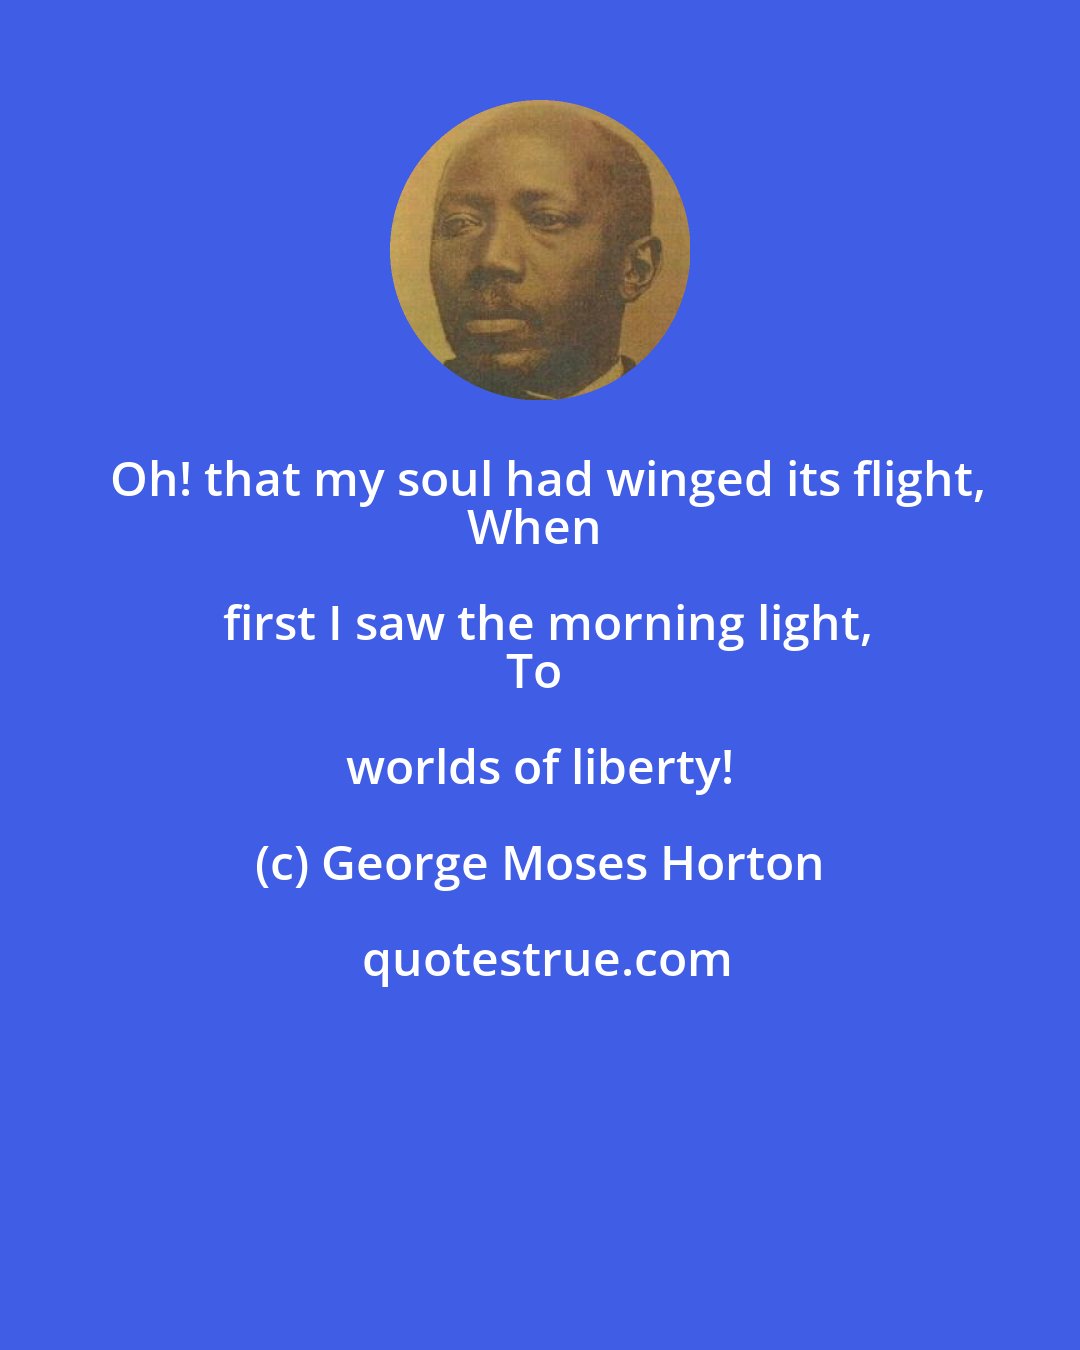 George Moses Horton: Oh! that my soul had winged its flight,
When first I saw the morning light,
To worlds of liberty!